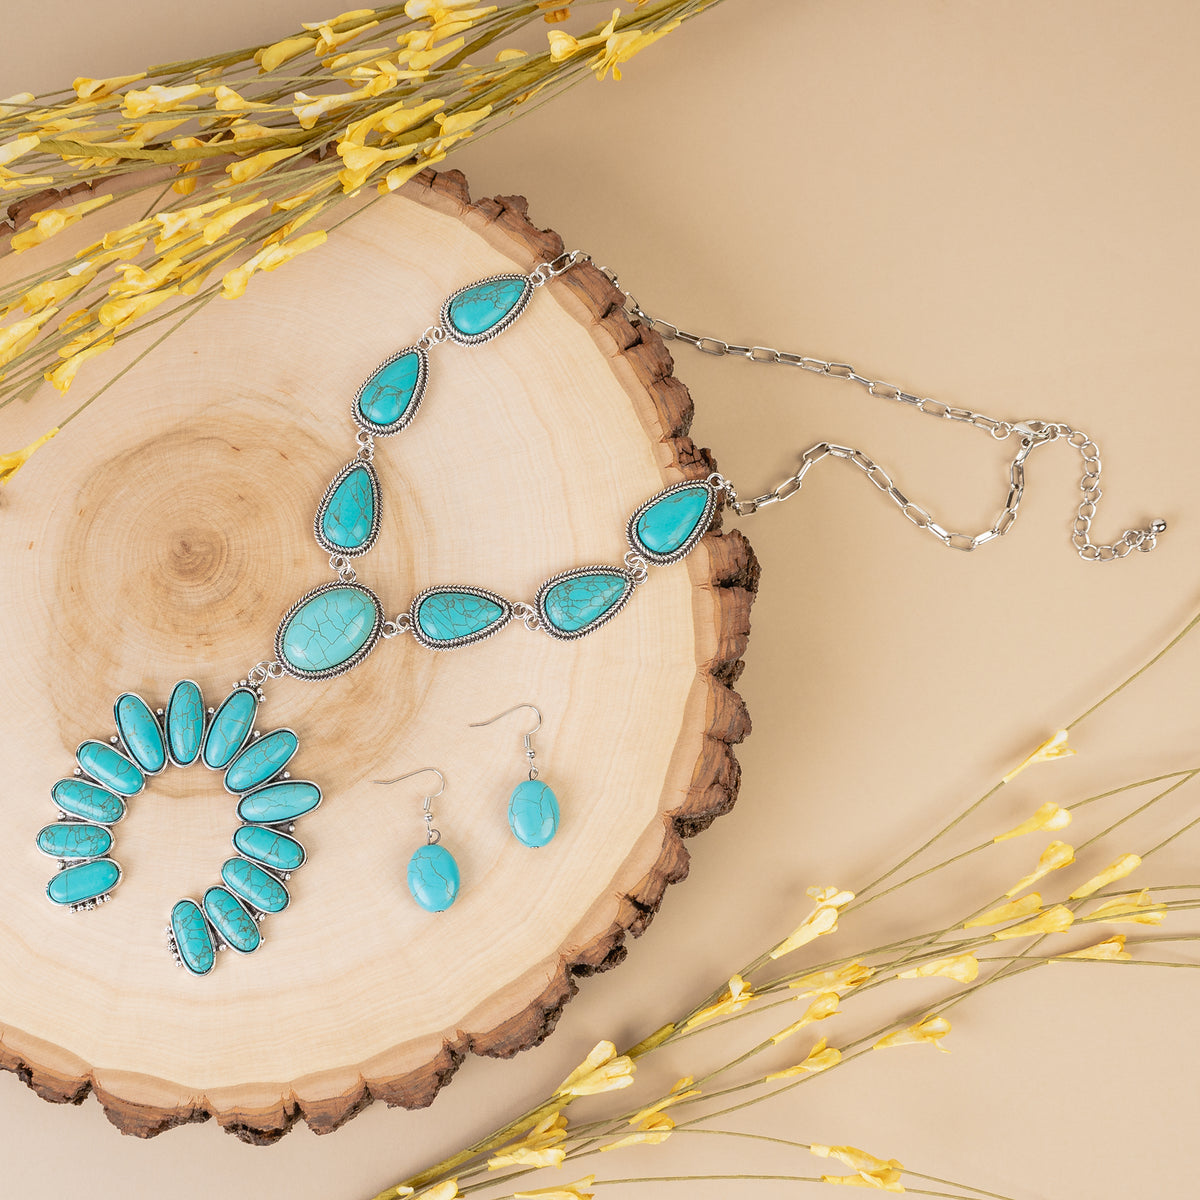 72946 - Squash Blossom Necklace - Turquoise & Silver